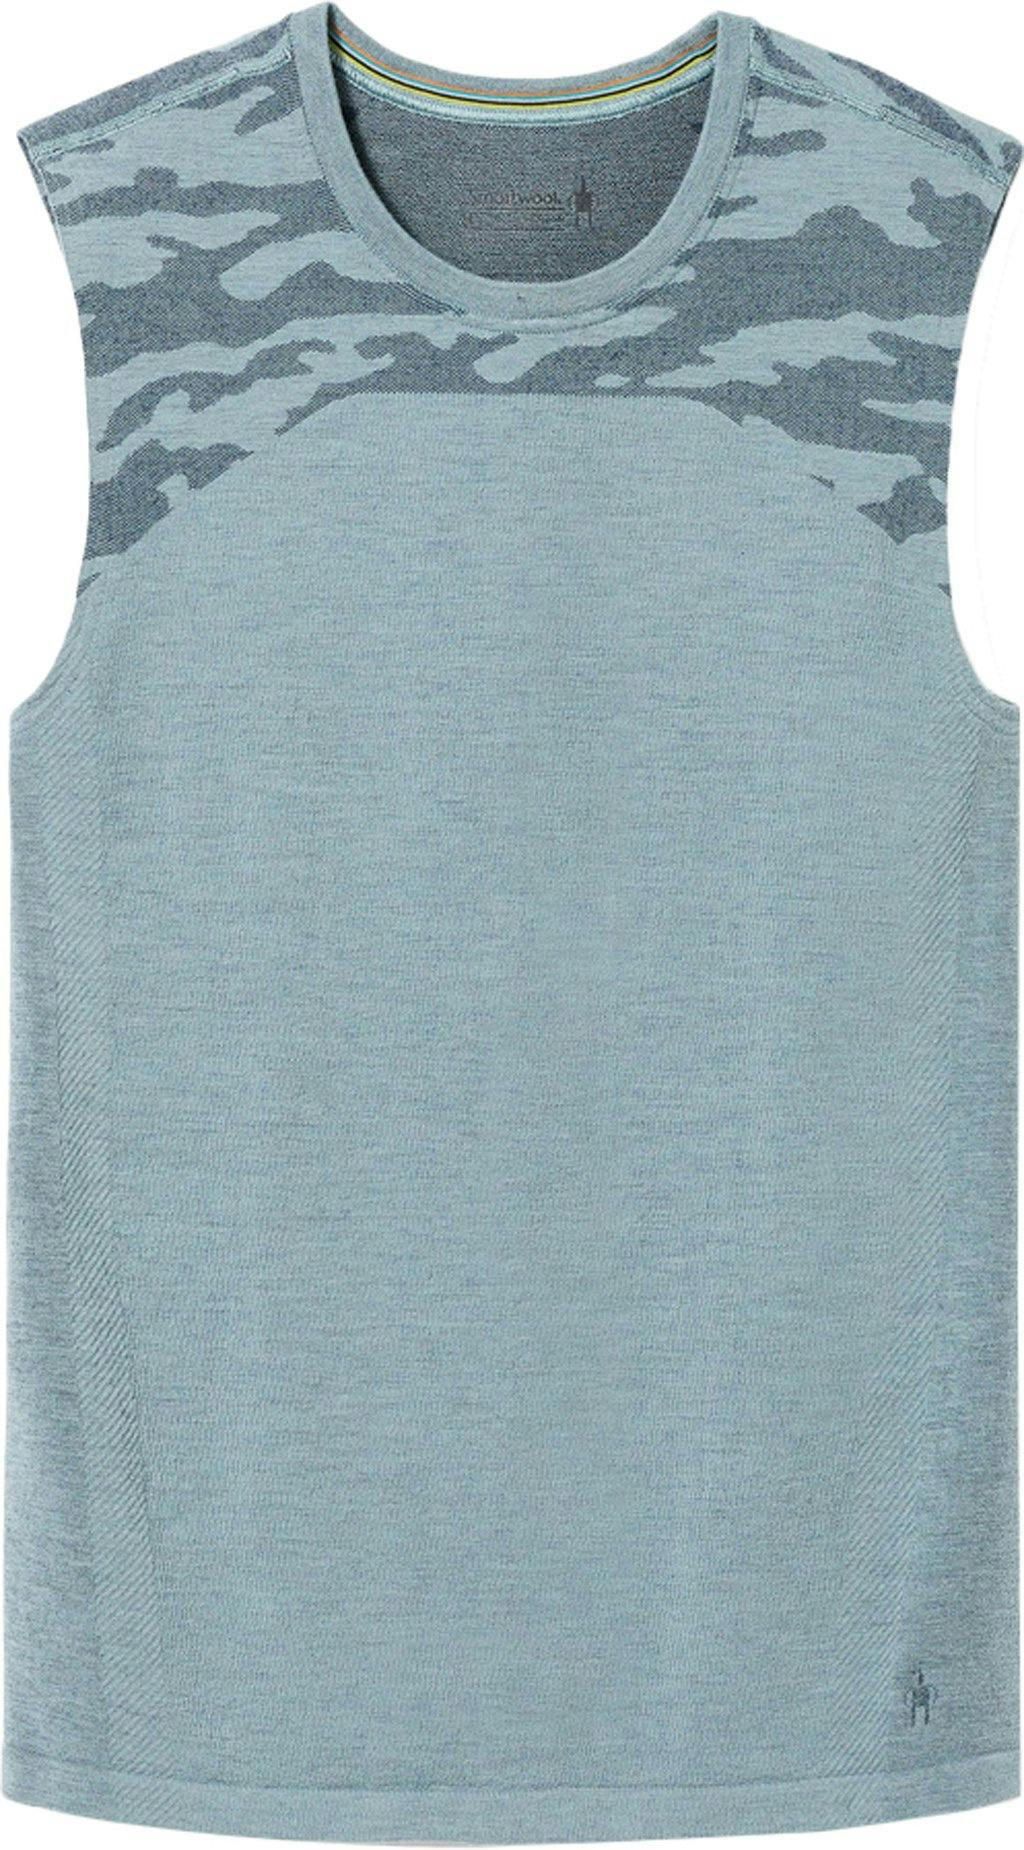 Product image for Intraknit Active Tank Top - Men's